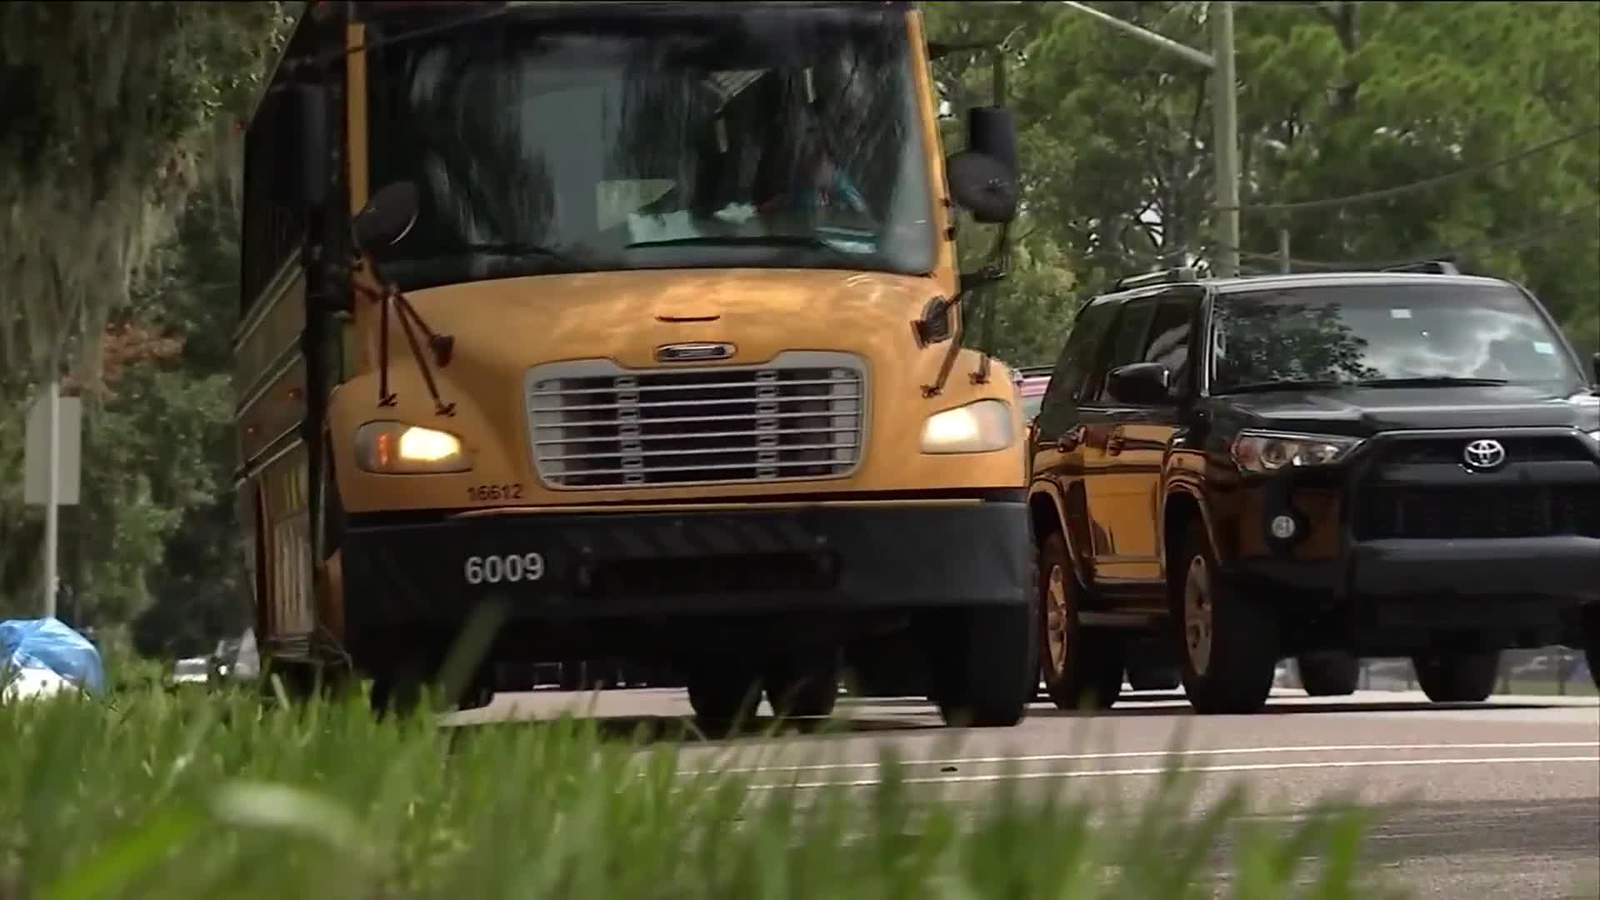 Wythe County school bus stolen, police need your help to find it